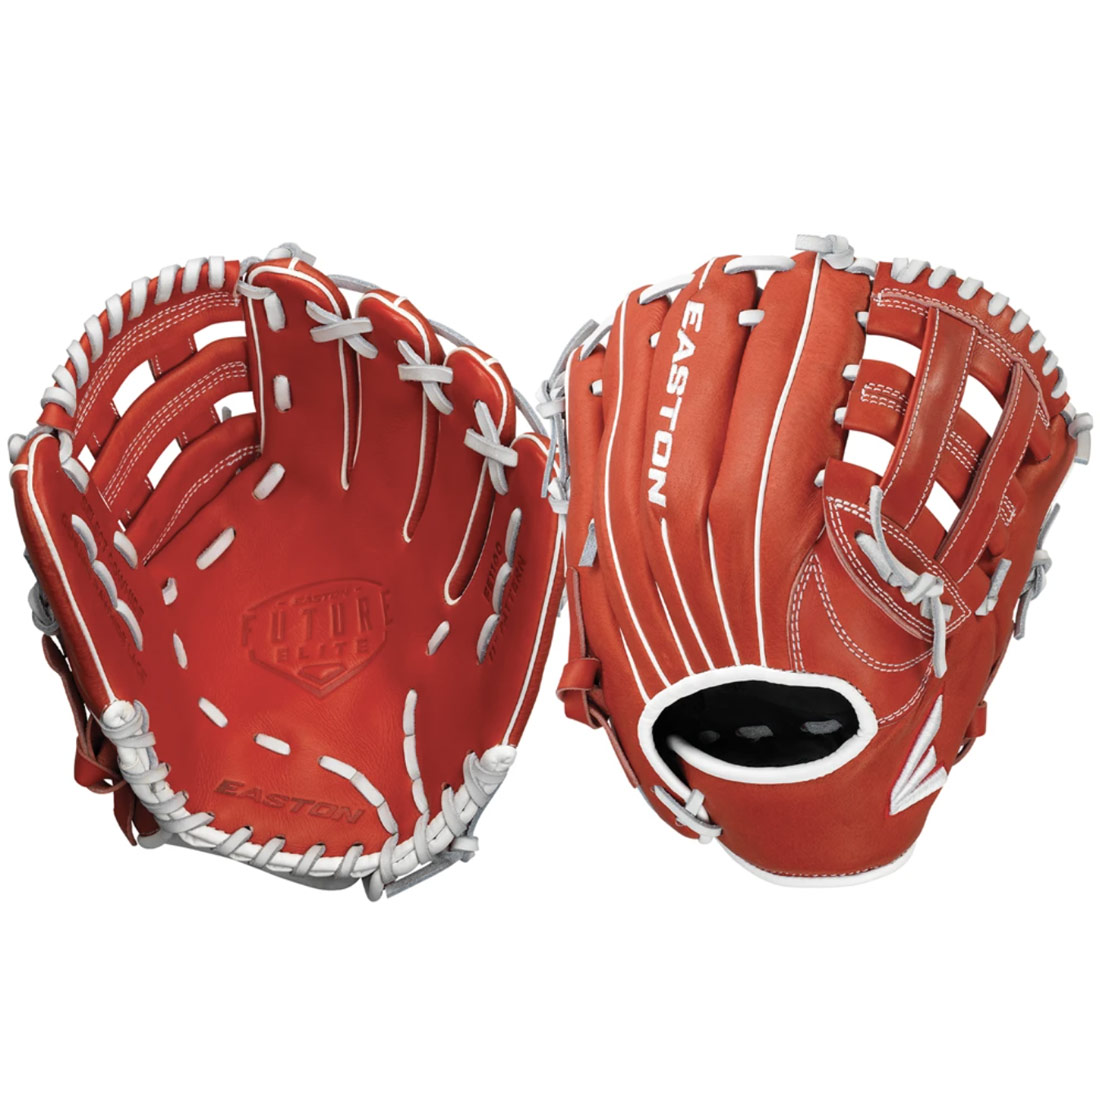 Easton Scout Flex SC1100 11" Youth Utility Baseball Glove Lists @ $40 NEW 